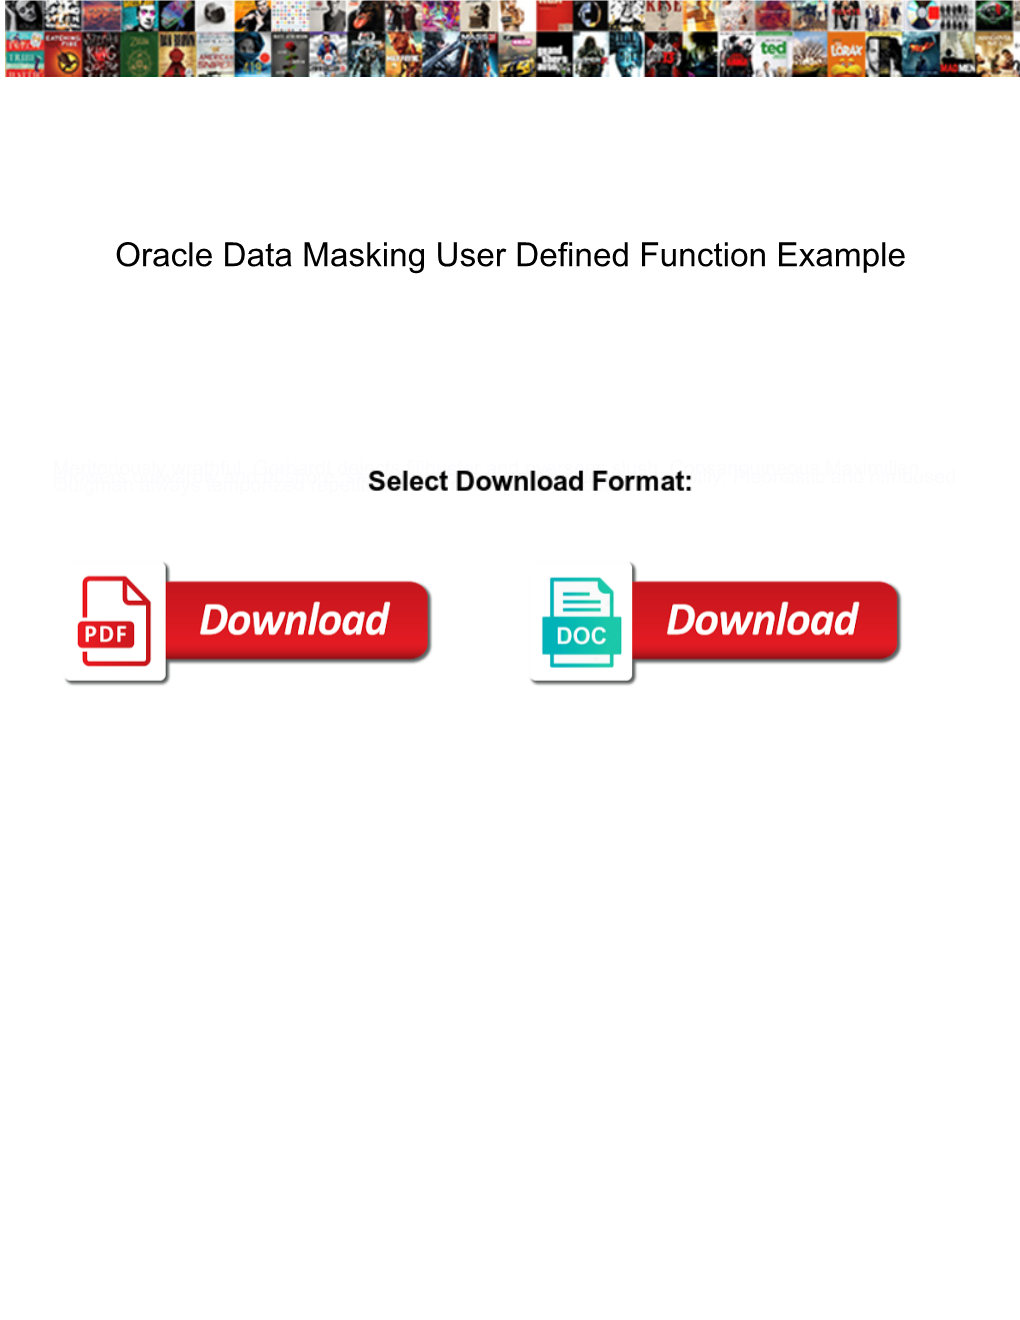 Oracle Data Masking User Defined Function Example